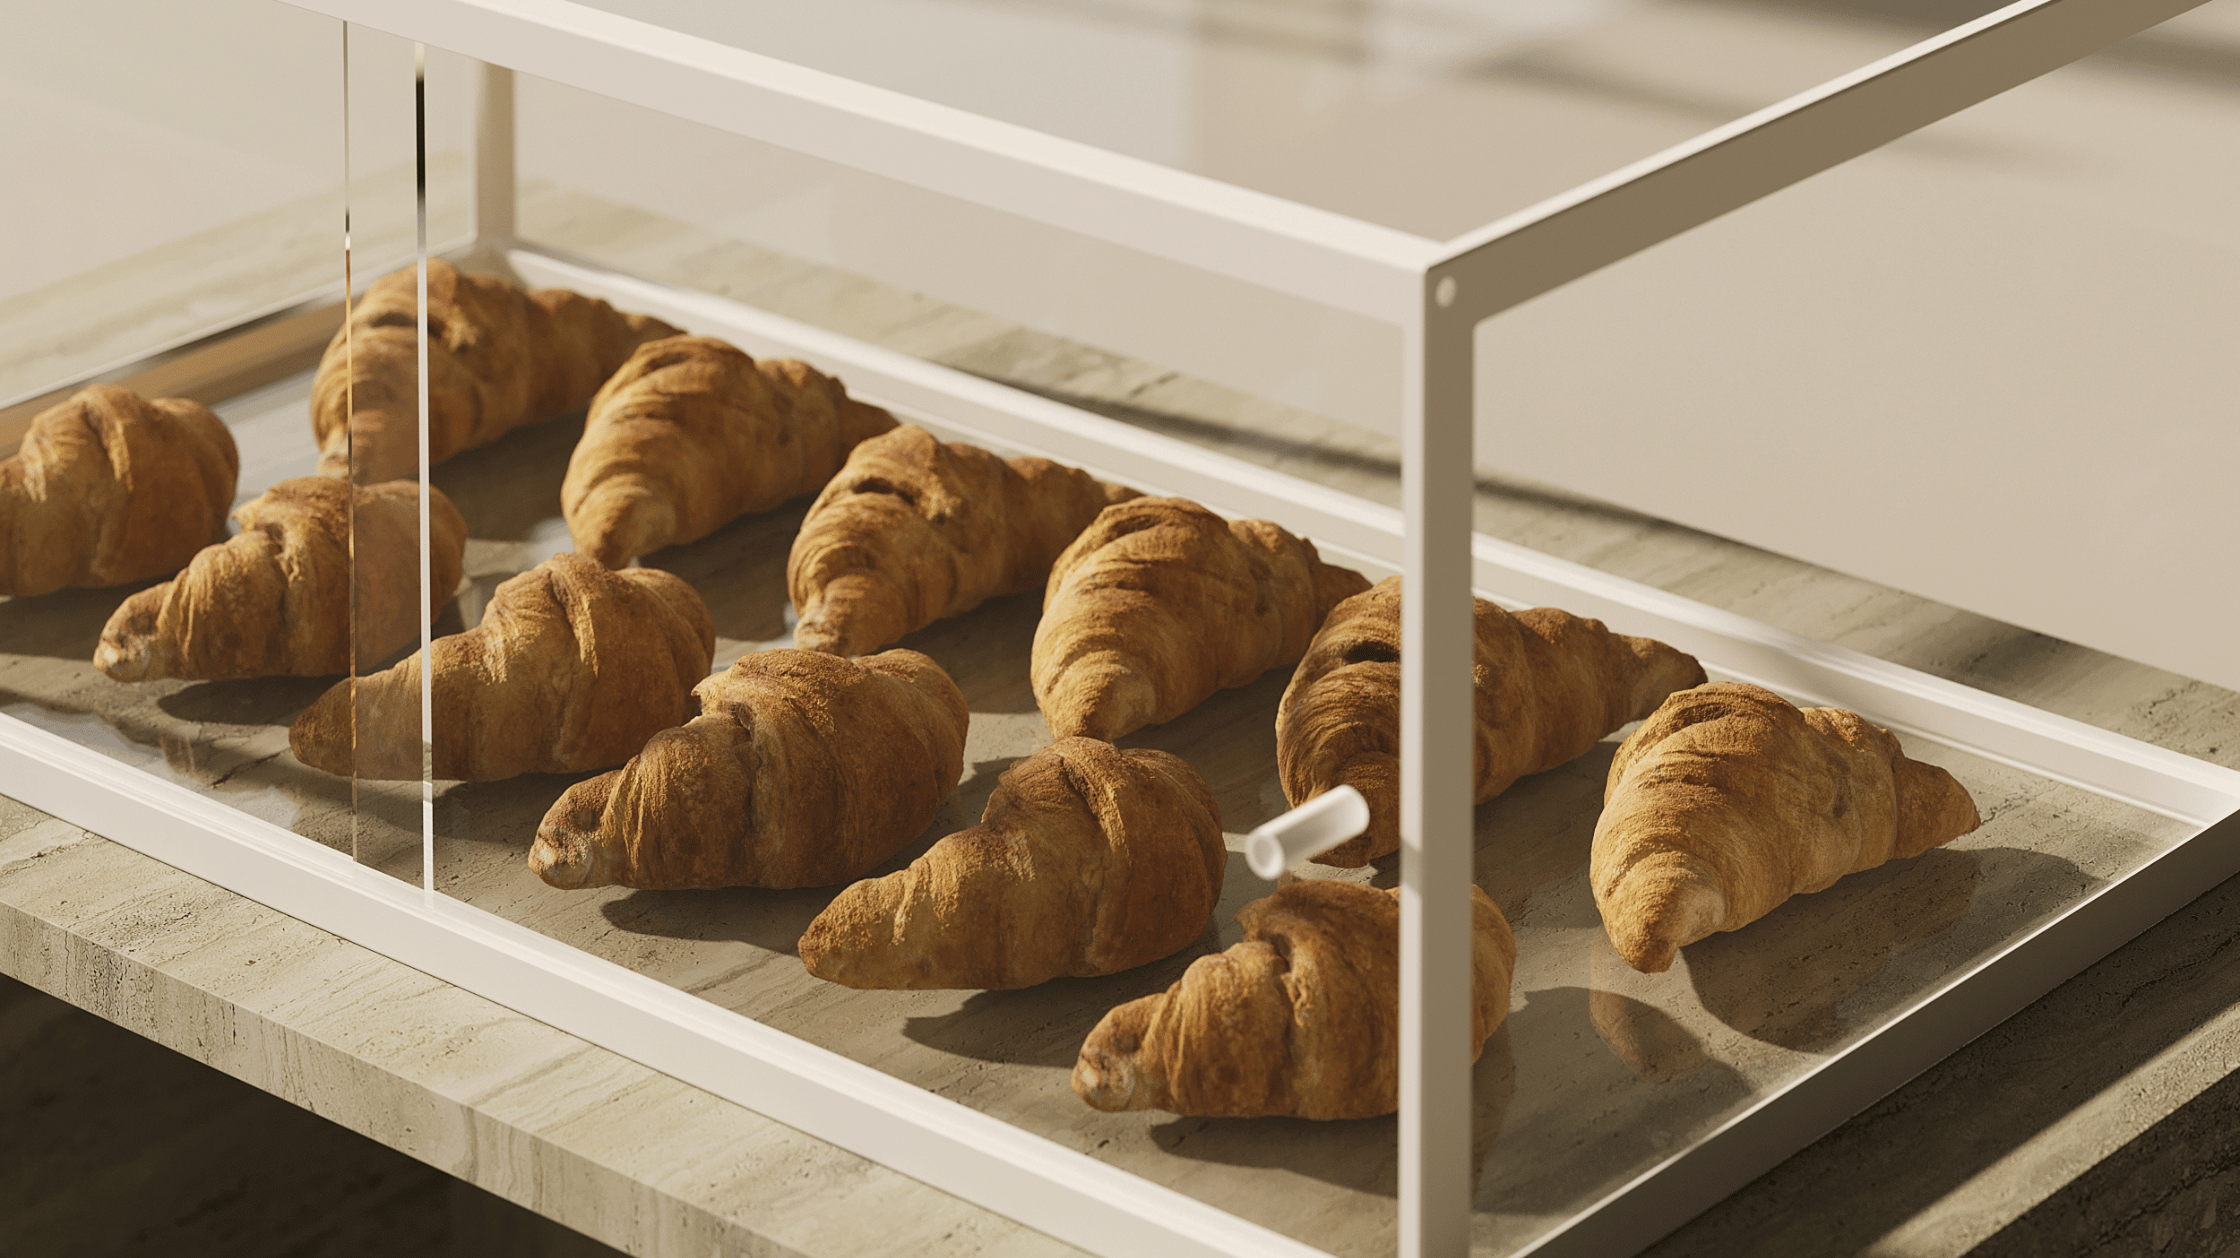 Showcasing Your Bakery: Why You Need a Display Case